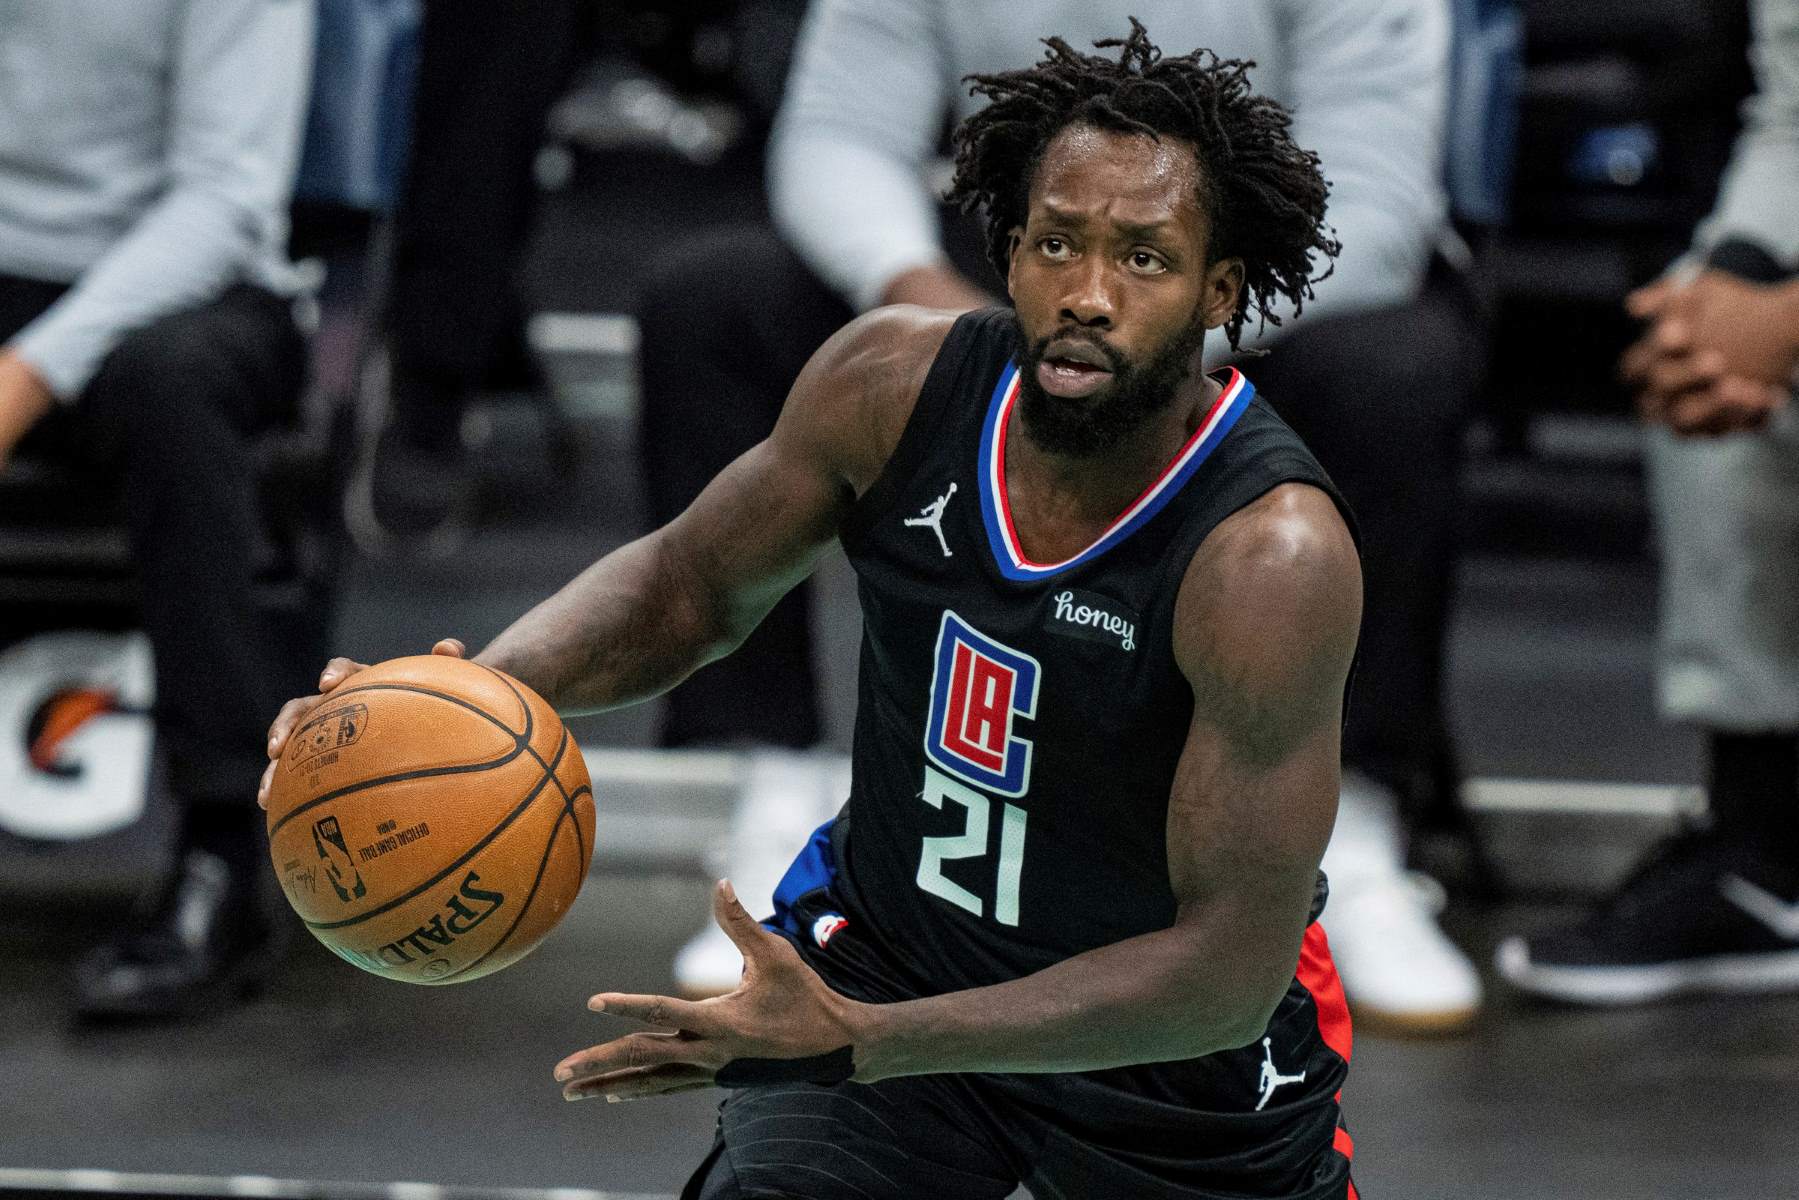 Patrick Beverley ready to make an impact for his hometown team